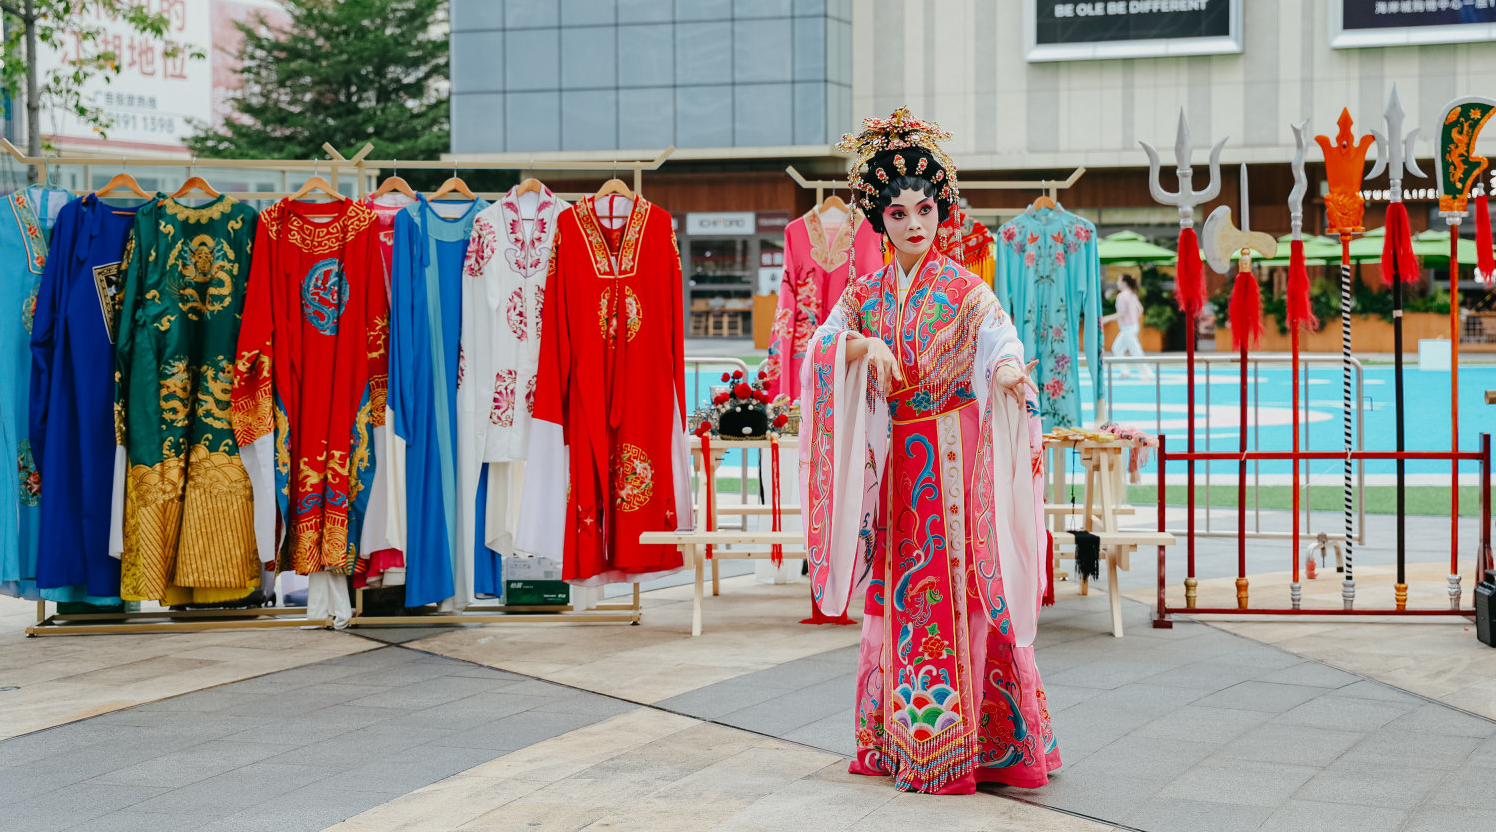 A Chinese opera performer is seen promoting theatrical art on the street in Shenzhen. /Photo provided to CGTN